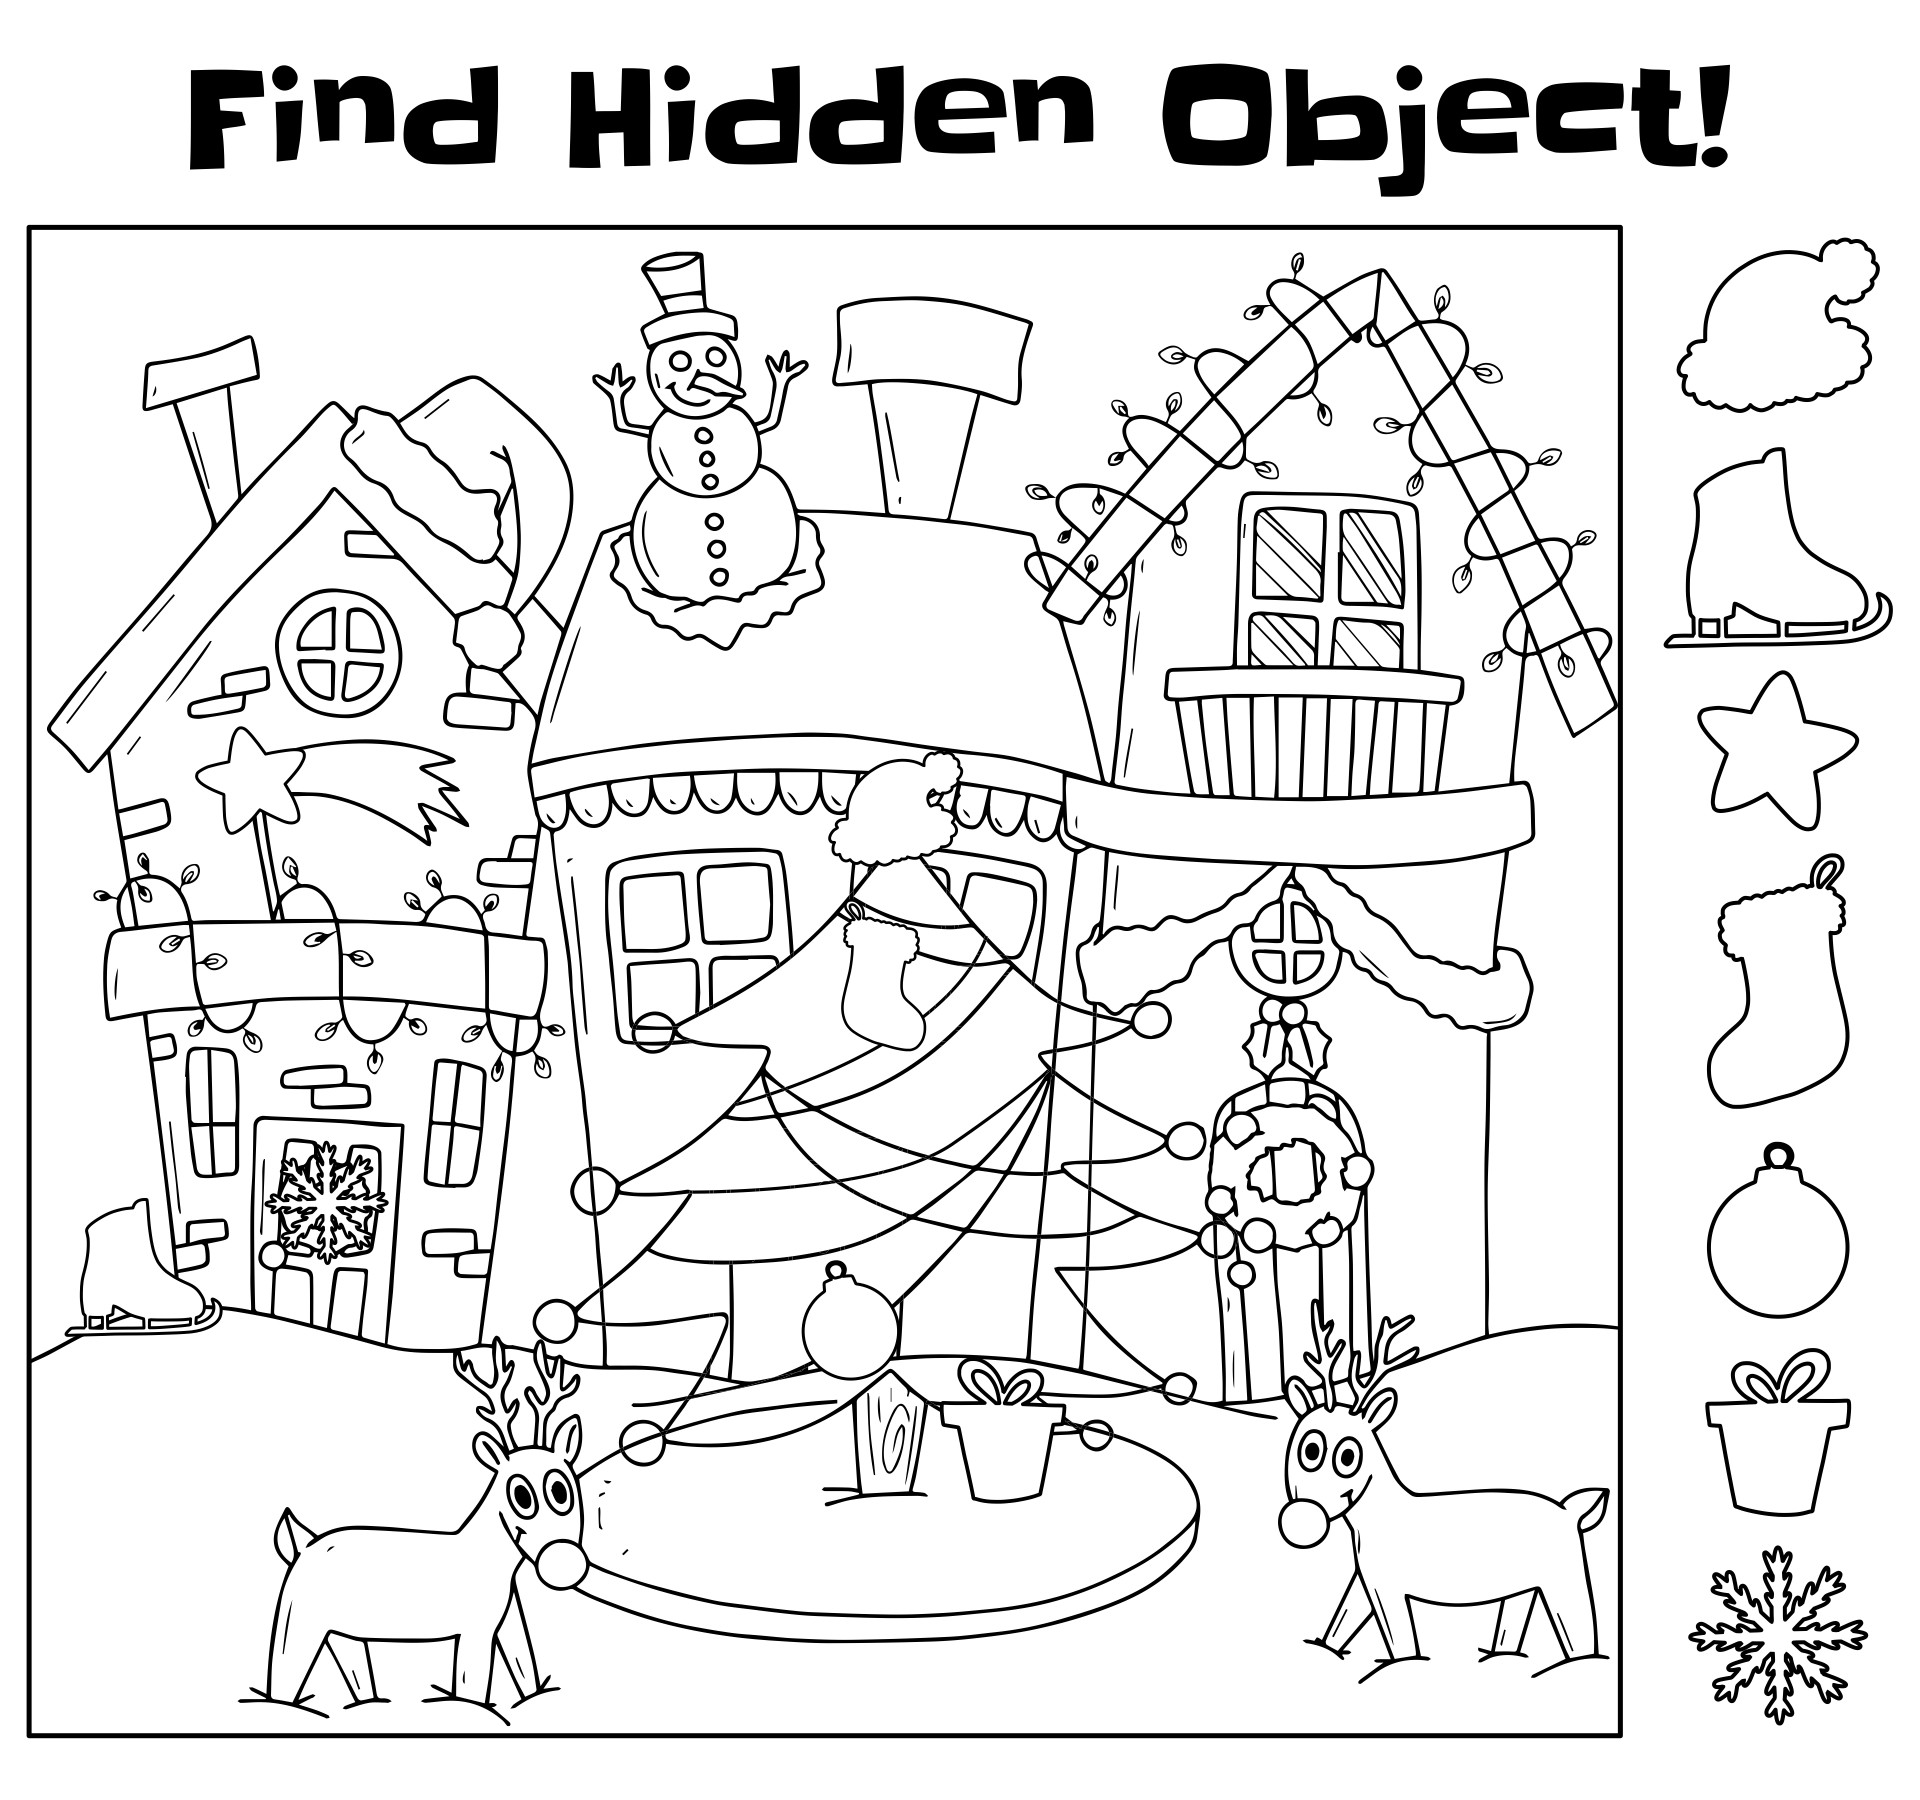 7-best-images-of-hidden-pictures-printables-for-adults-free-hidden